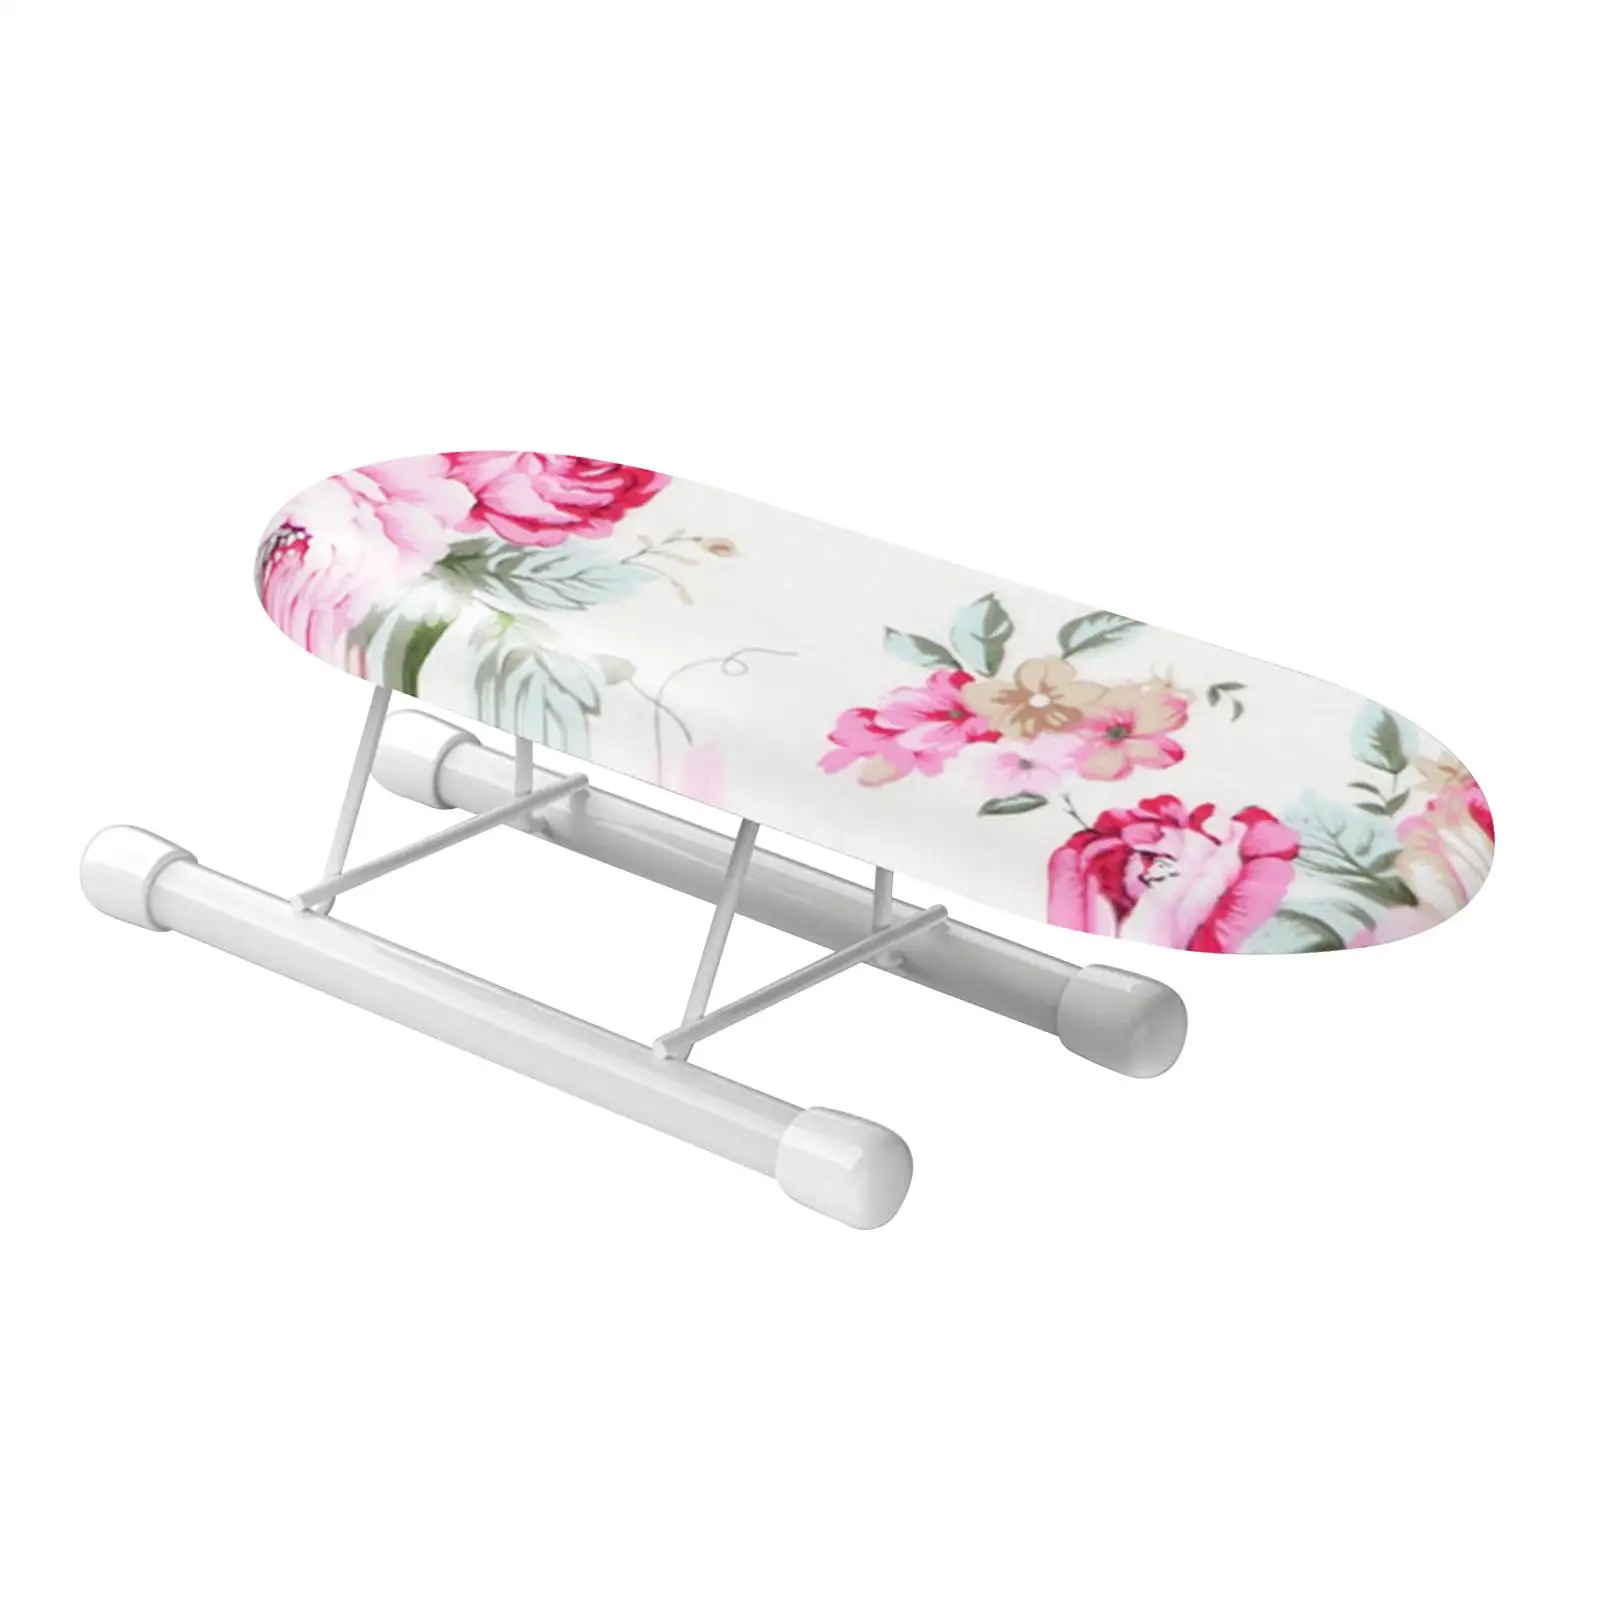 Small Folding Ironing Board, Removable Cover, Ironing Cuffs Neckline for Apartments, Home, Travel